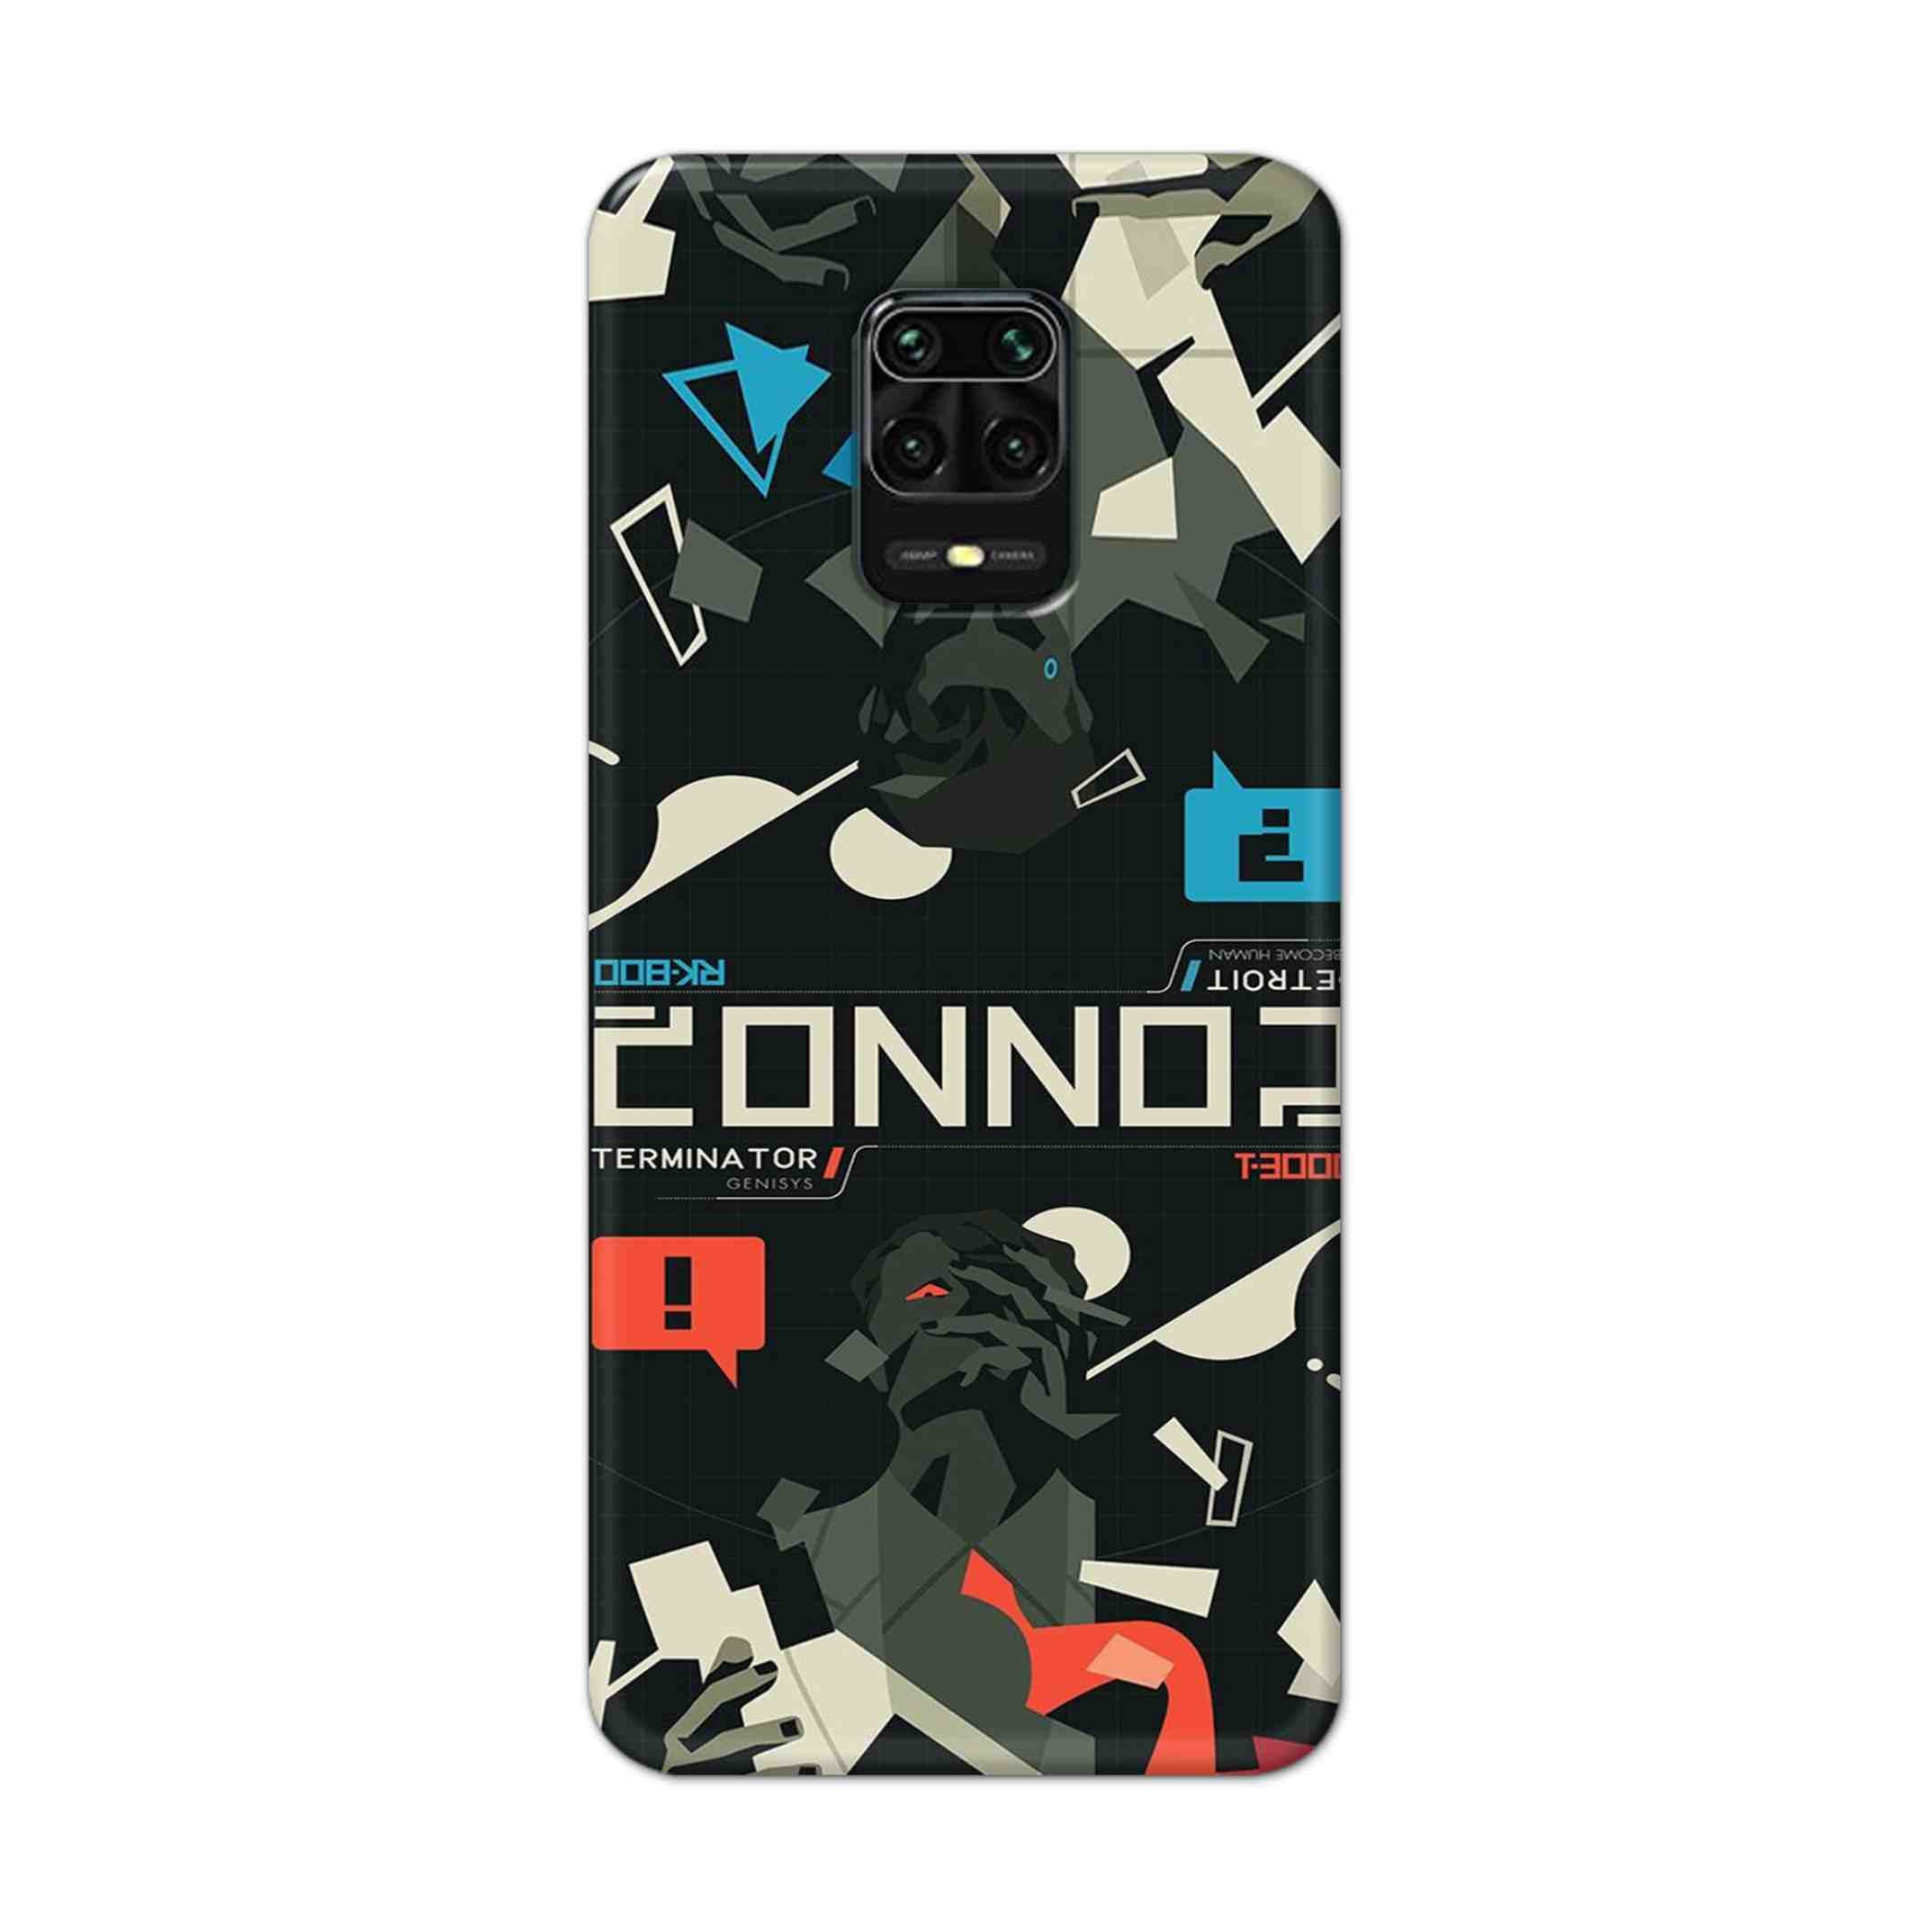 Buy Terminator Hard Back Mobile Phone Case Cover For Redmi Note 9 Pro Online